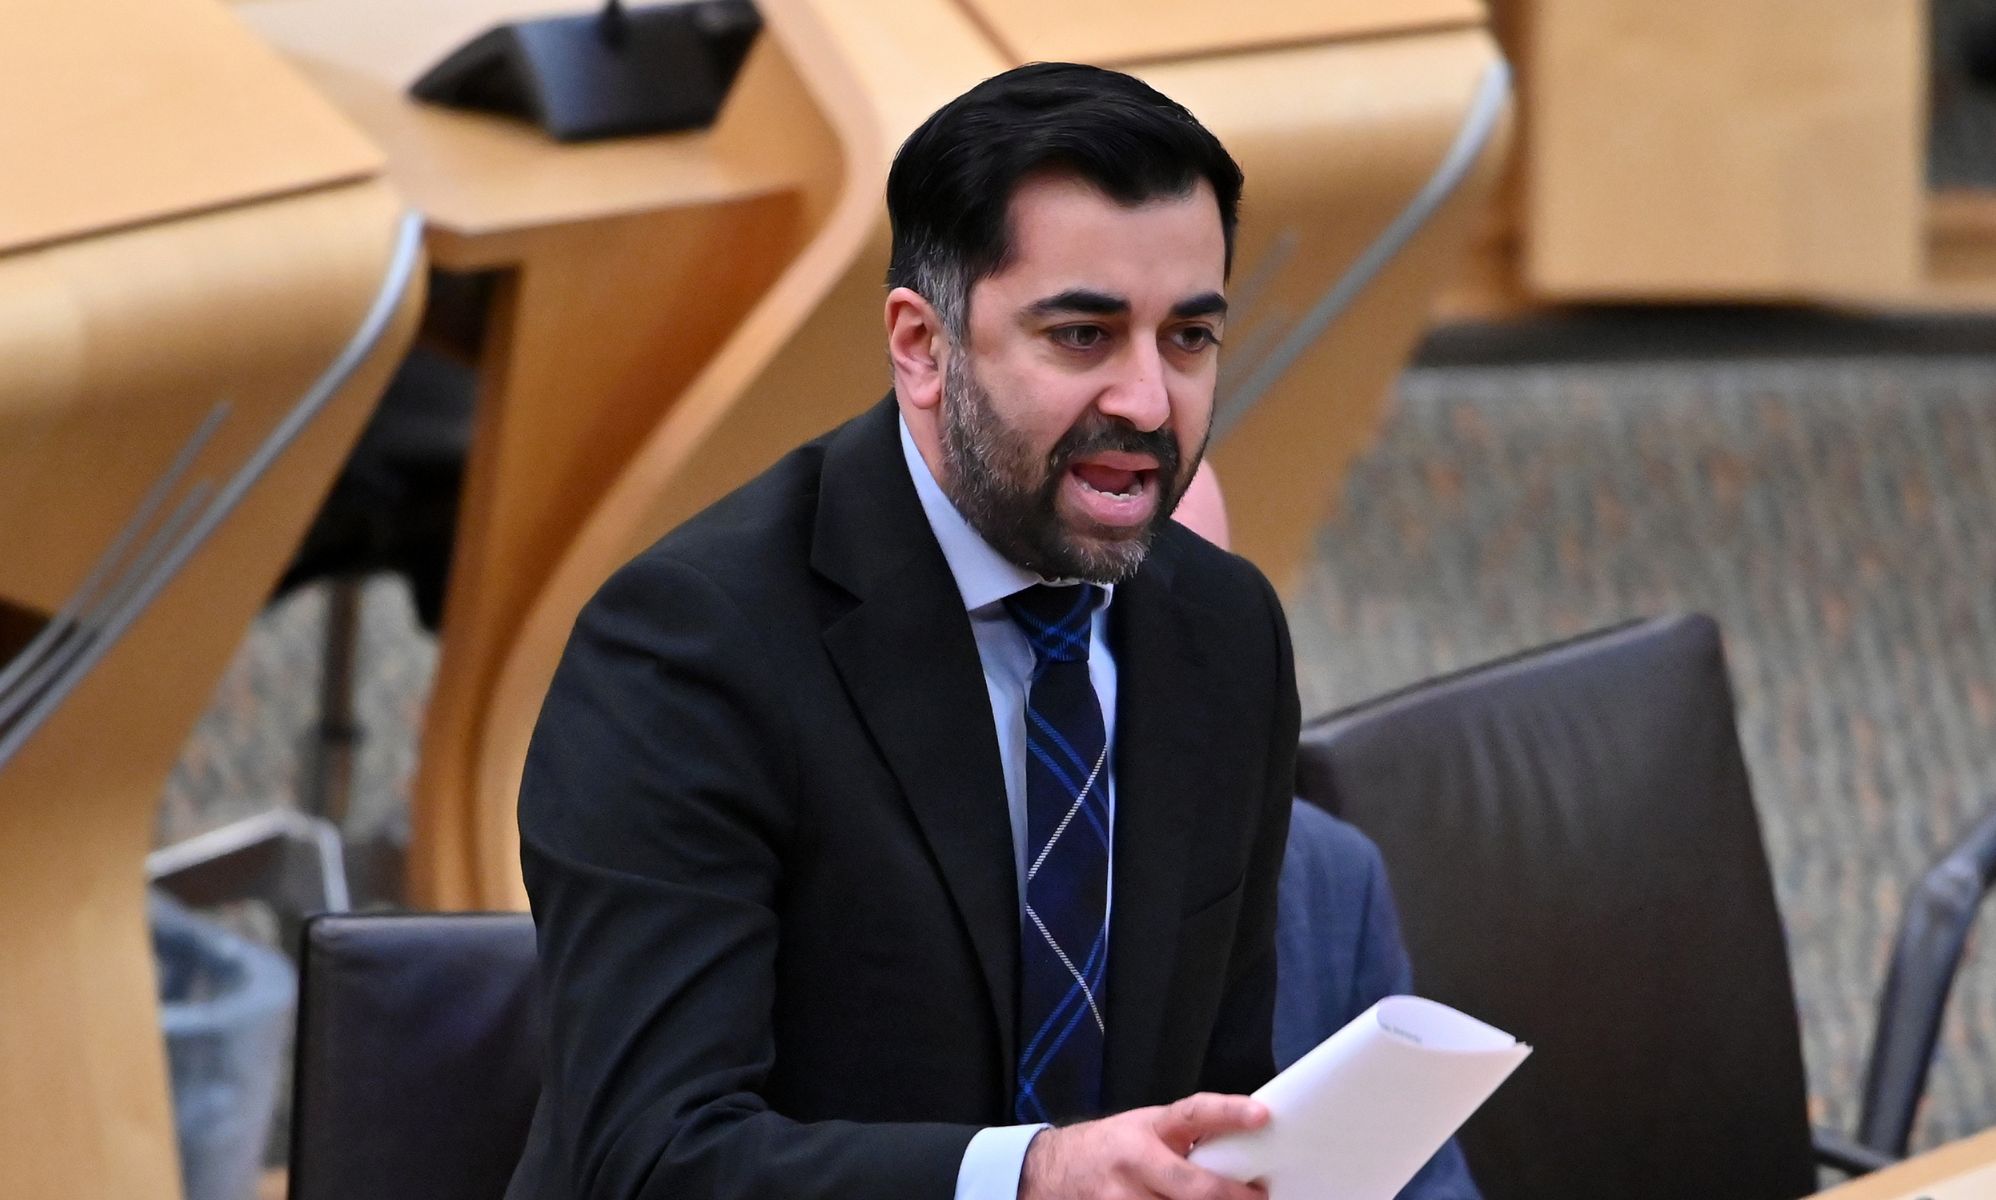 Humza Yousaf on LGBTQ rights: SNP candidate’s trans views